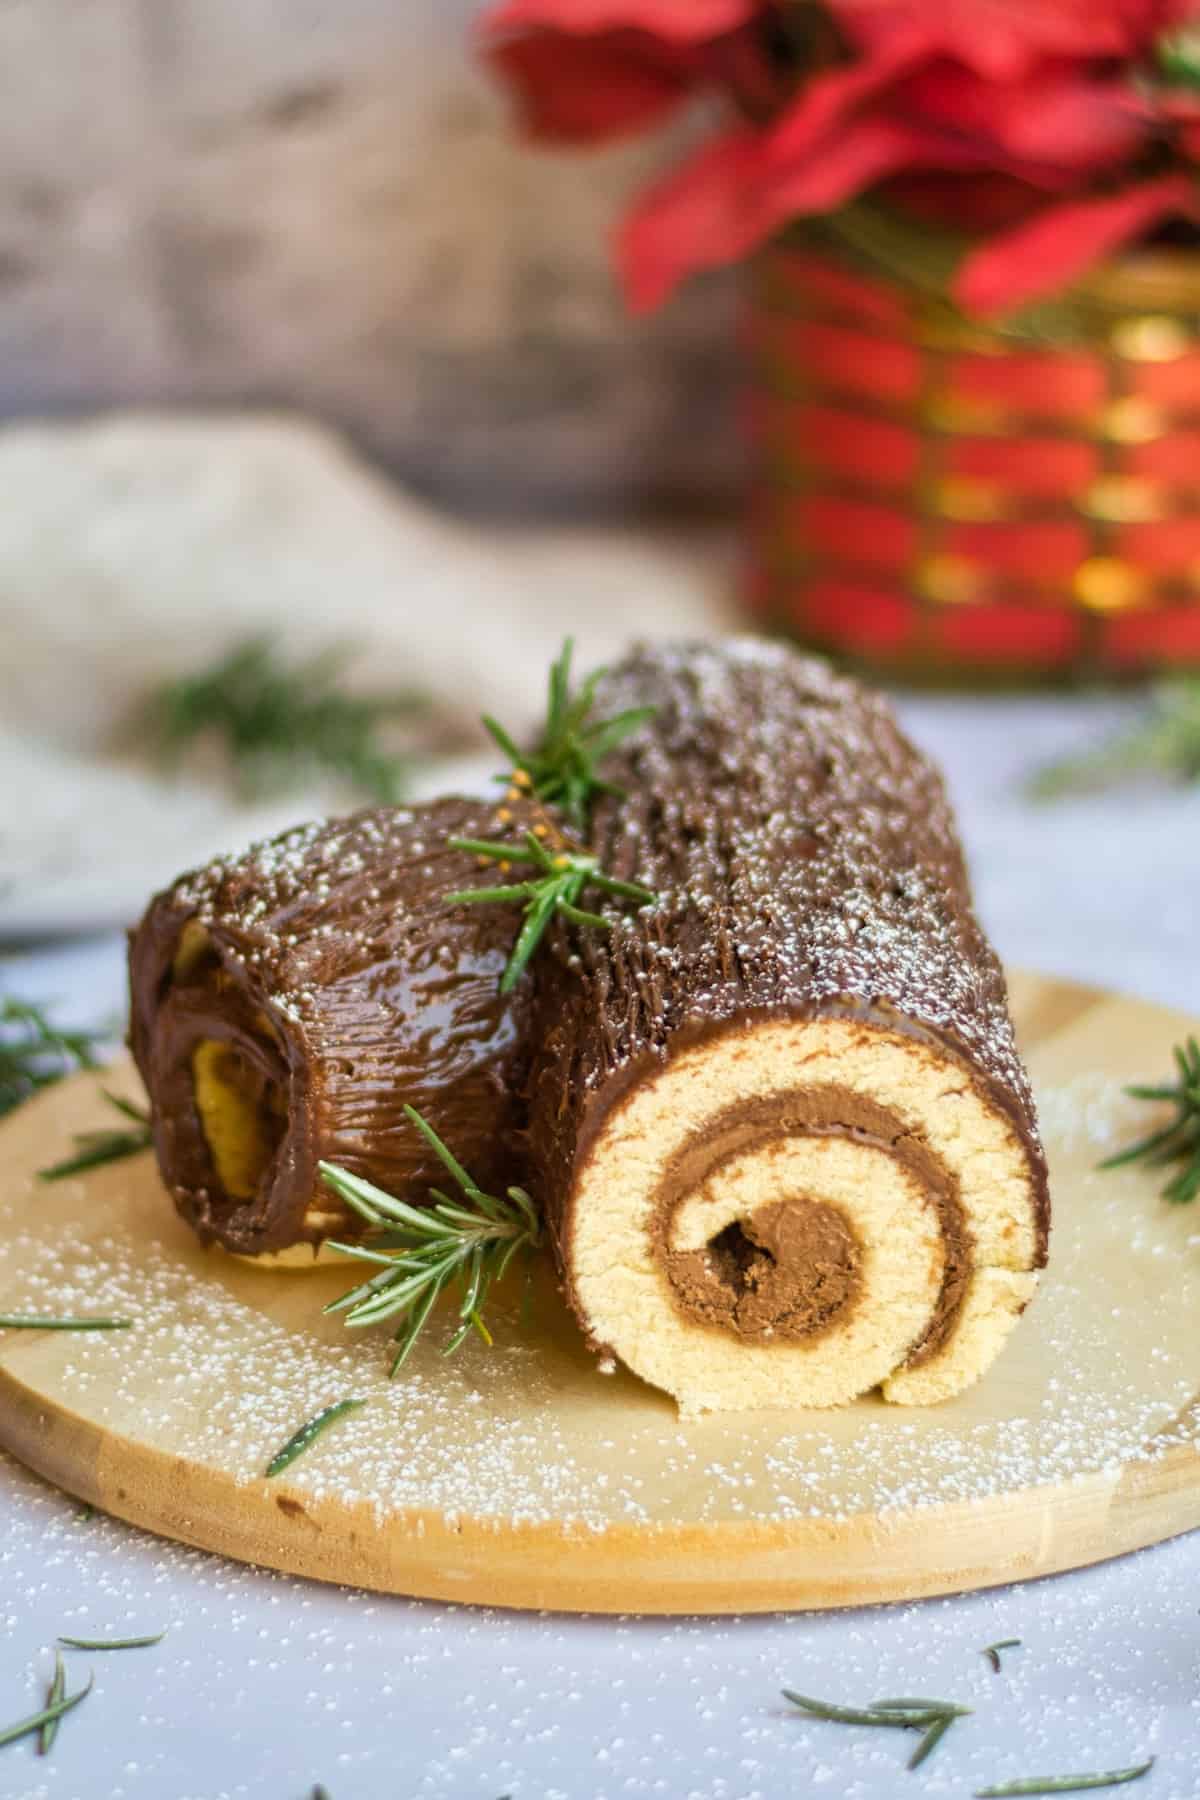 Vanilla rolled cake with chocolate frosting and Christmas decoration.